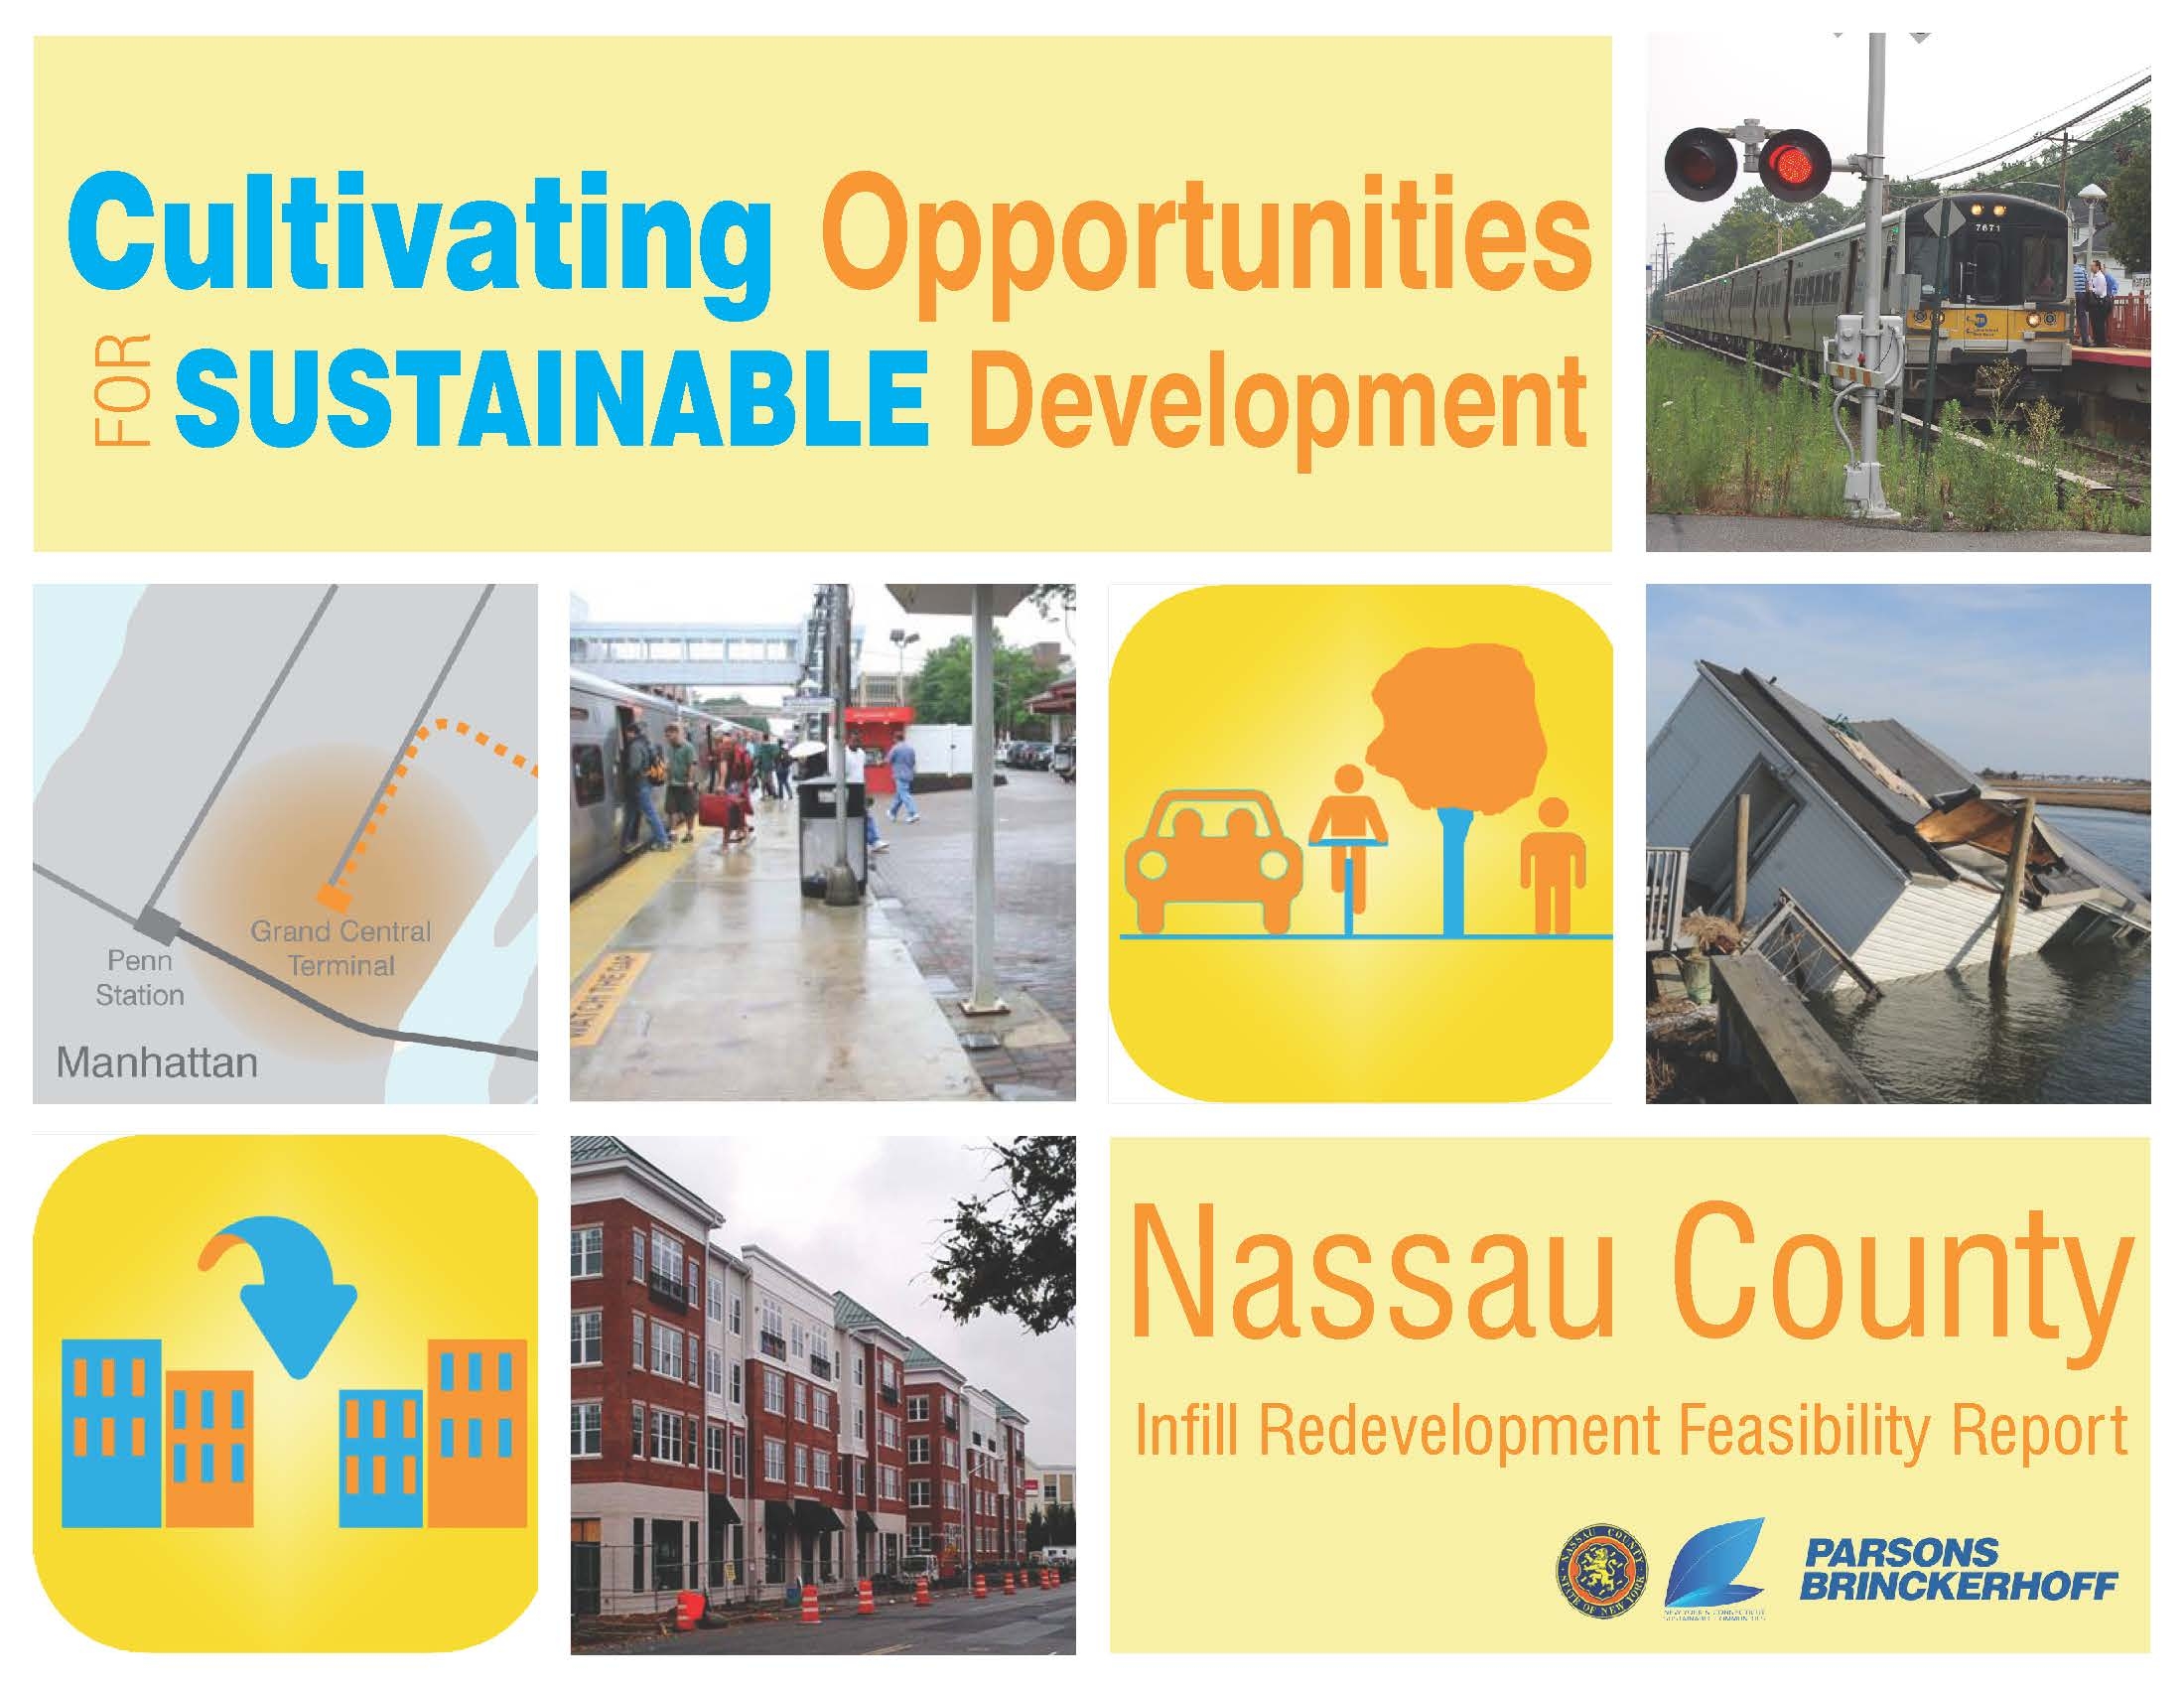 Cultivating Opportunities for Sustainable Development